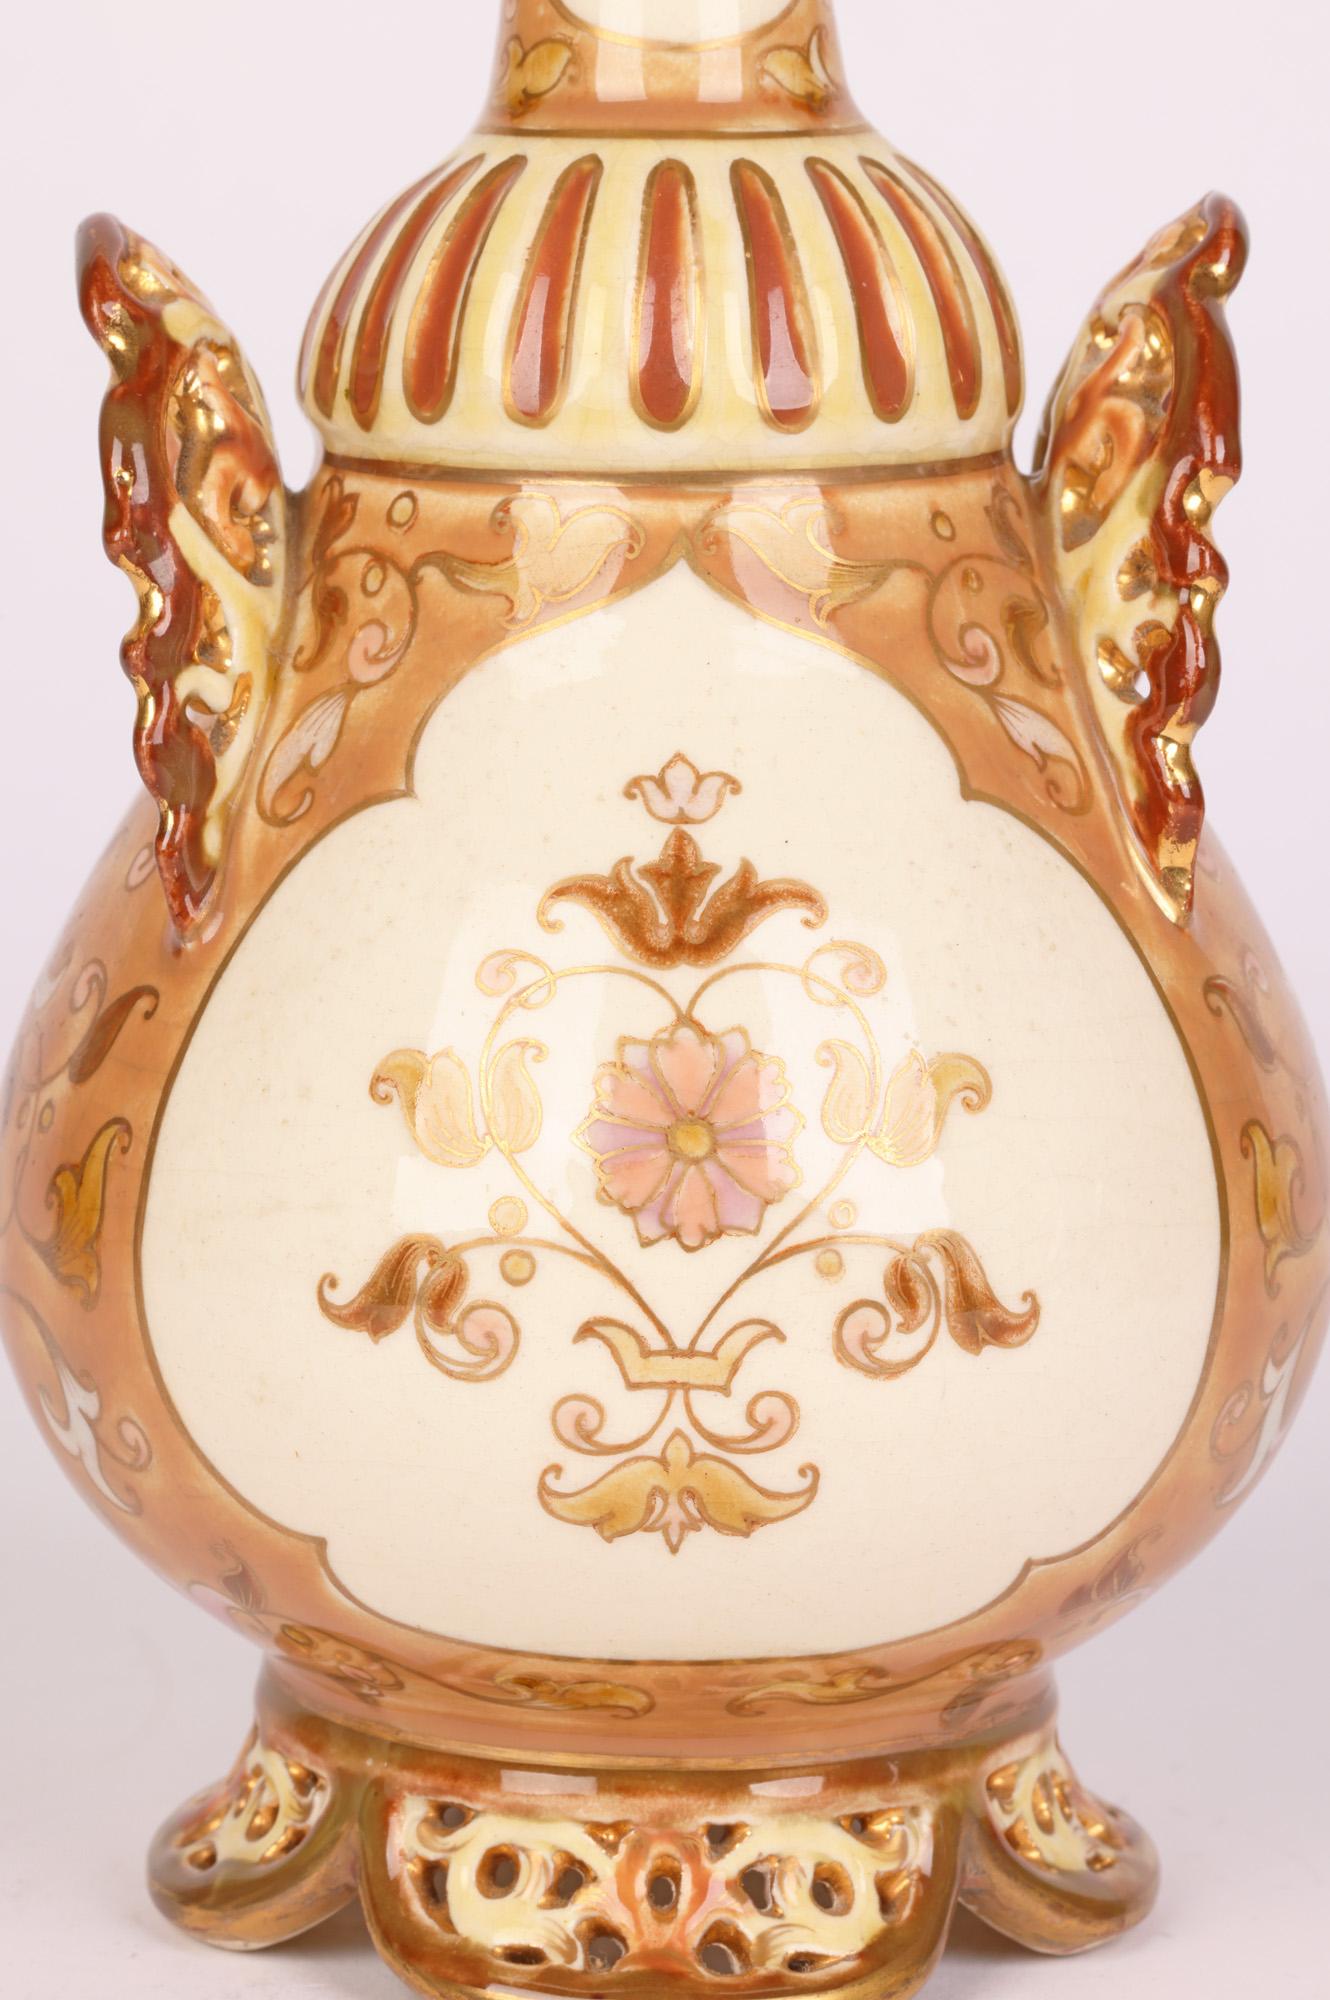 Zsolnay Hungarian Islamic Influence Floral Painted Porcelain Vase In Good Condition For Sale In Bishop's Stortford, Hertfordshire